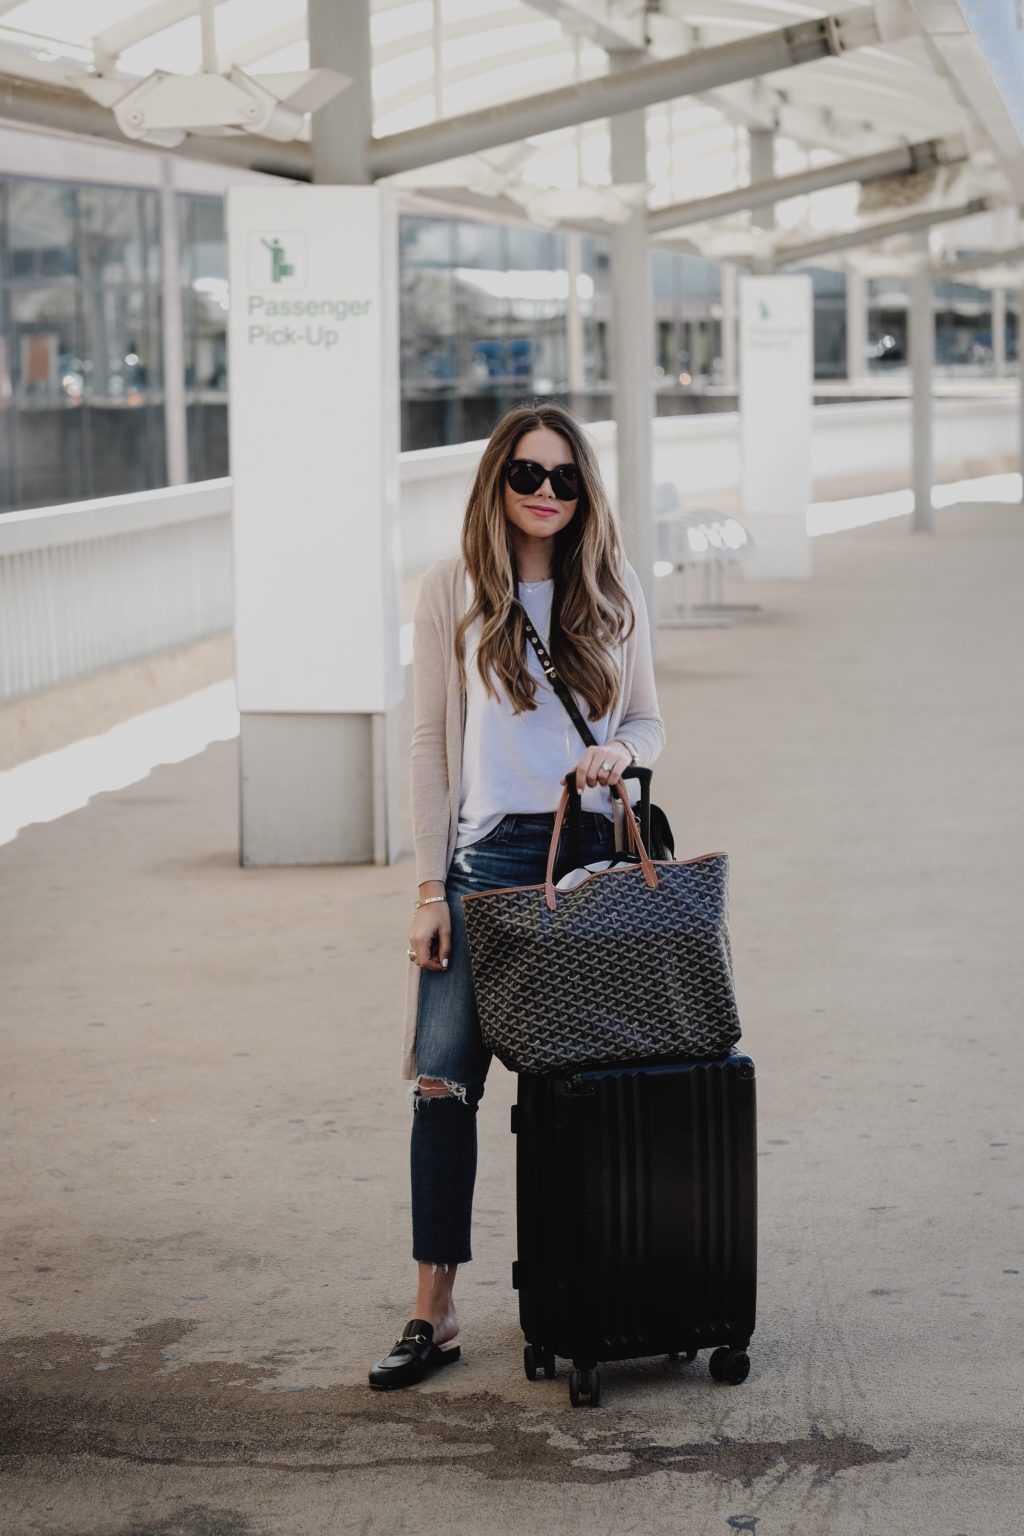 Travel in Style with Personalized Luggage + Accessories  The Teacher Diva:  a Dallas Fashion Blog featuring Beauty & Lifestyle